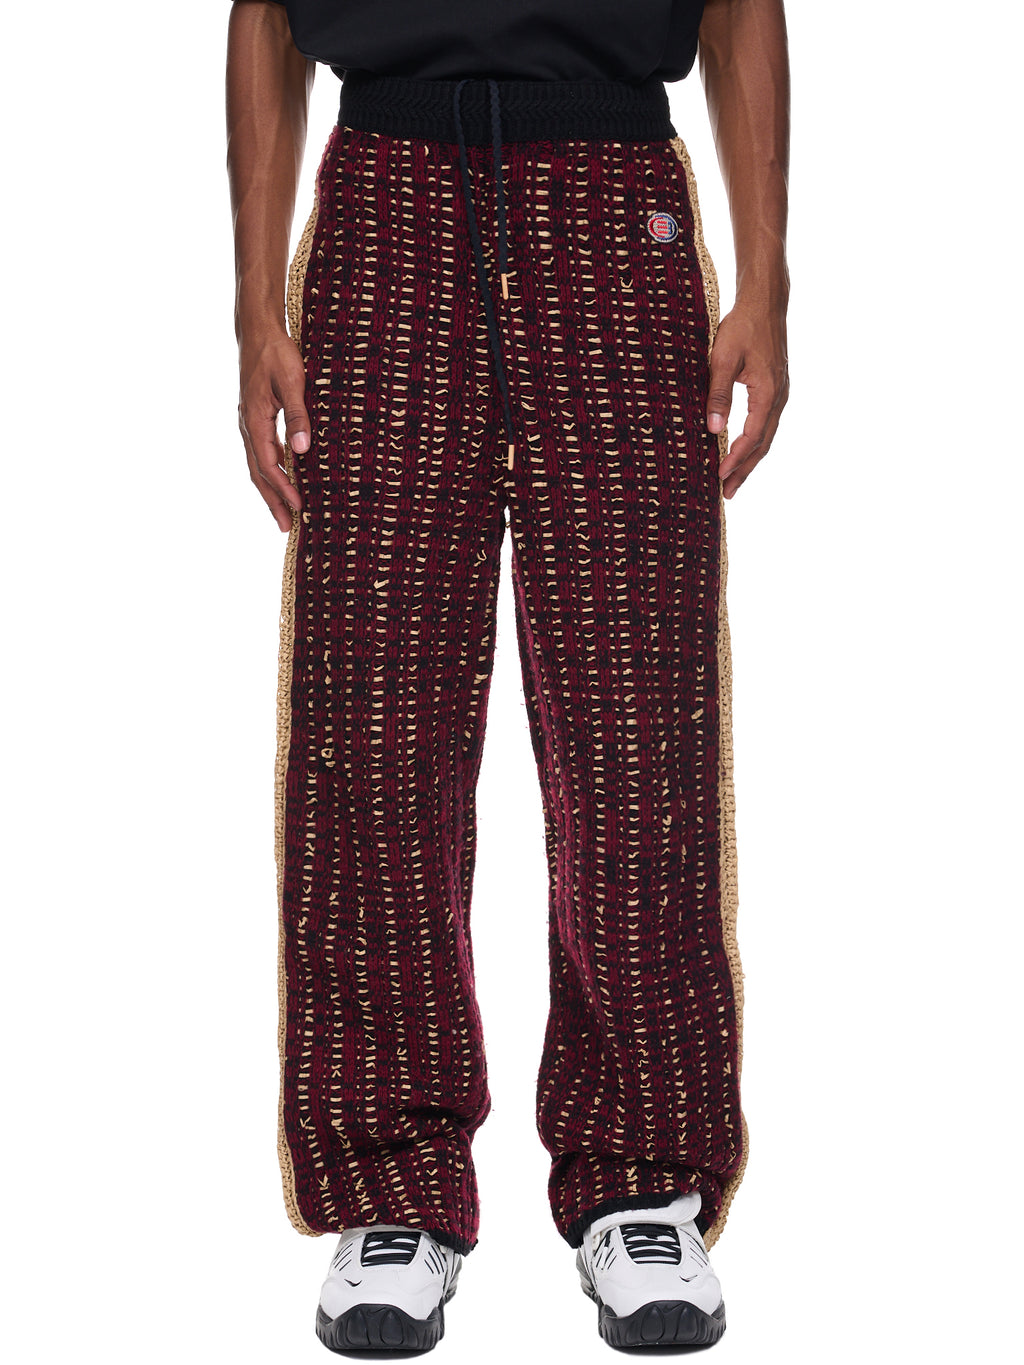 Tombo Cuffed Track Pants - PenCarrie